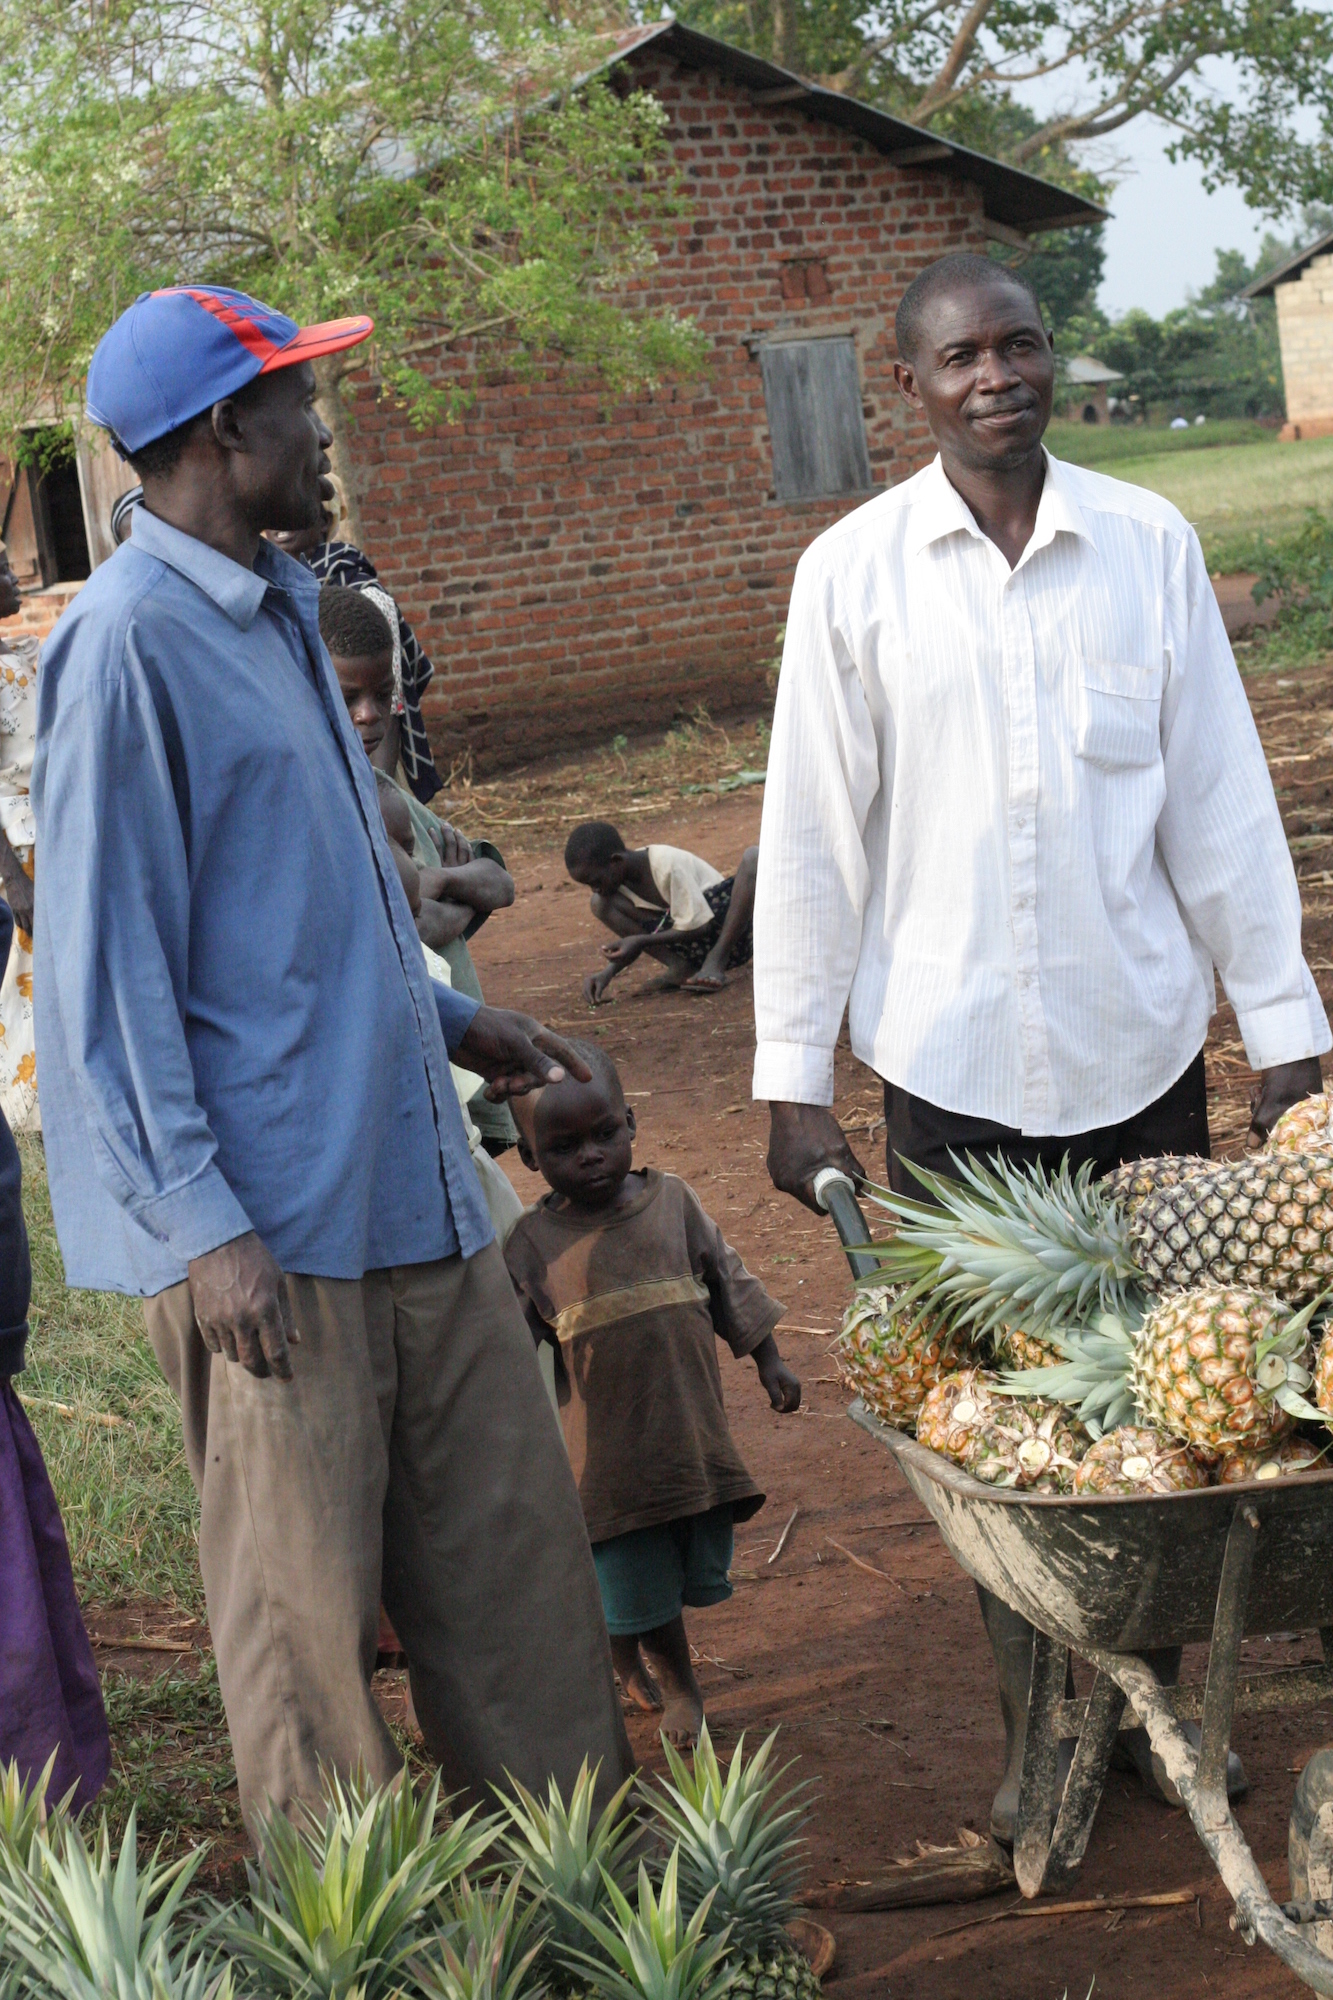 Two men, one with wheelbarrow full of pineapples